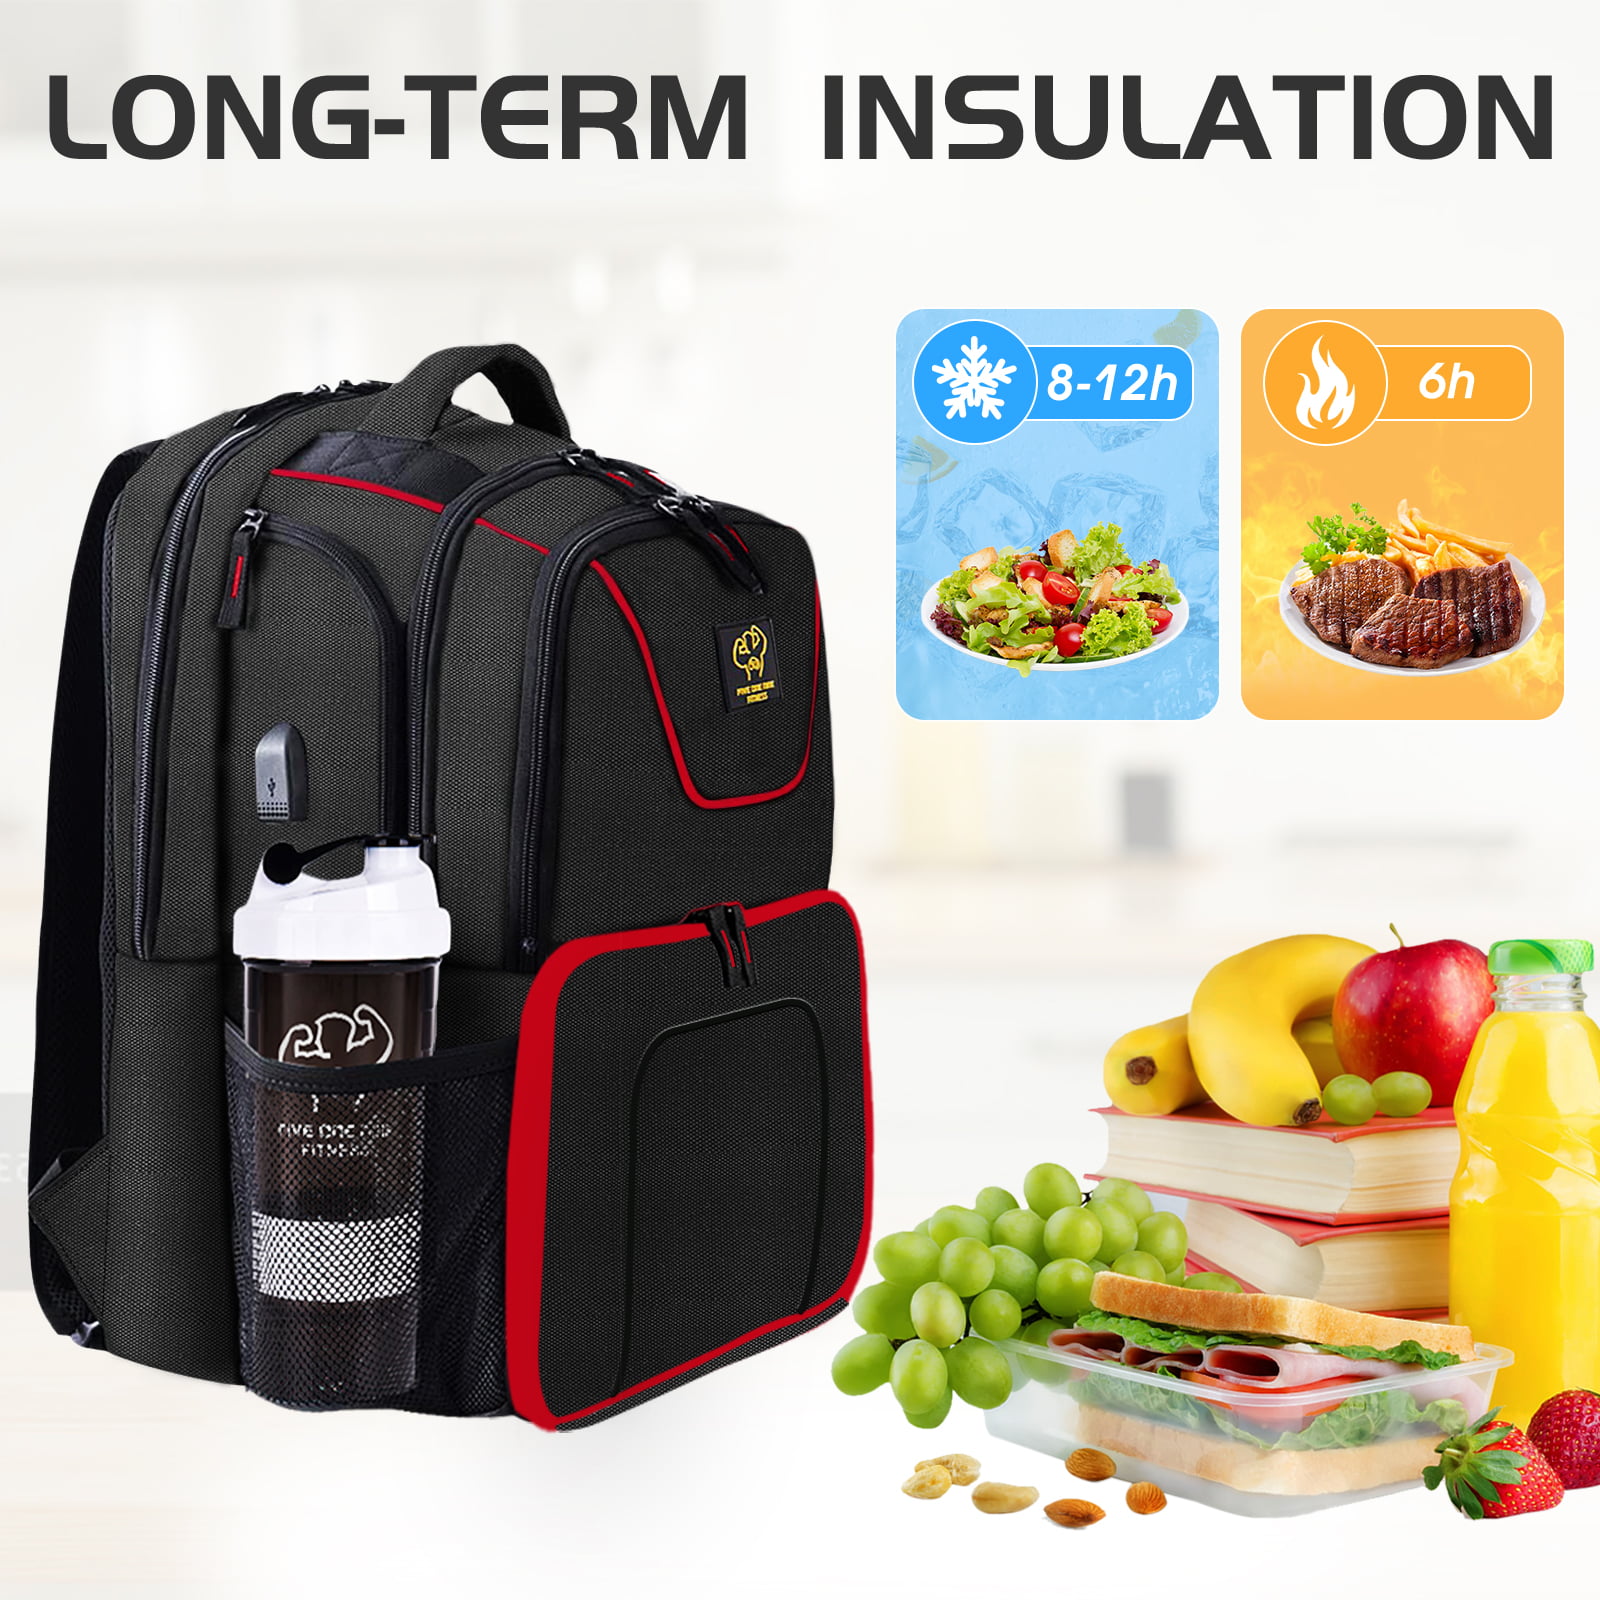 Tactical Meal Prep Backpack,519 Fitness Insulated Lunch Backpack with Removable Meal Compartment,16 Hours Insulation,Hiking Lunch Rucksack with